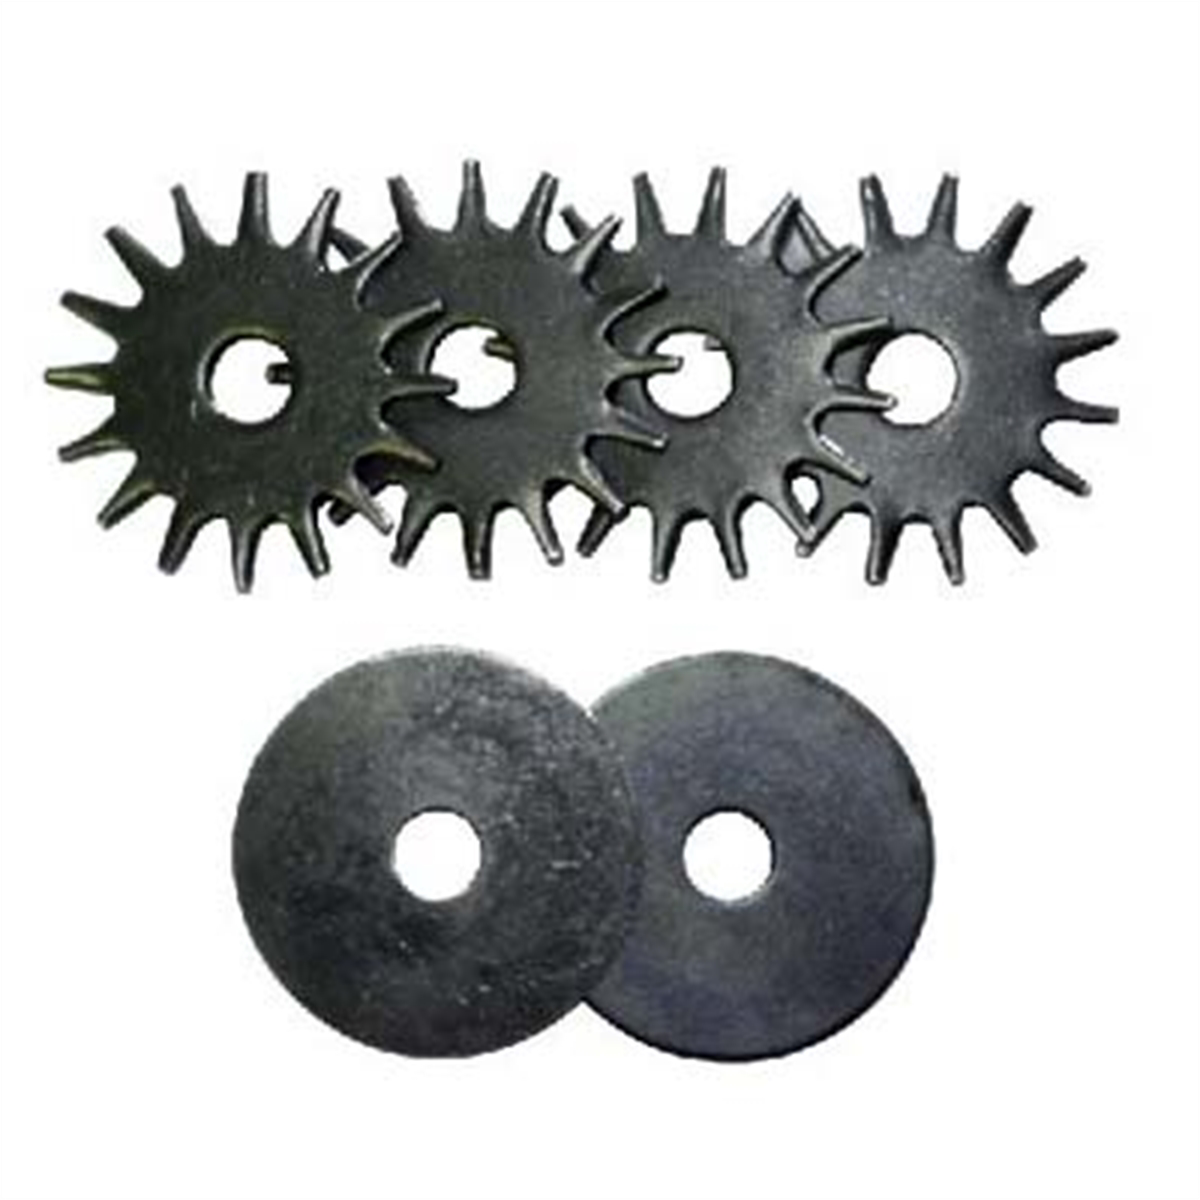 Replacement Cutters for the 12933 Grinding Wheel Dressing Tool 4